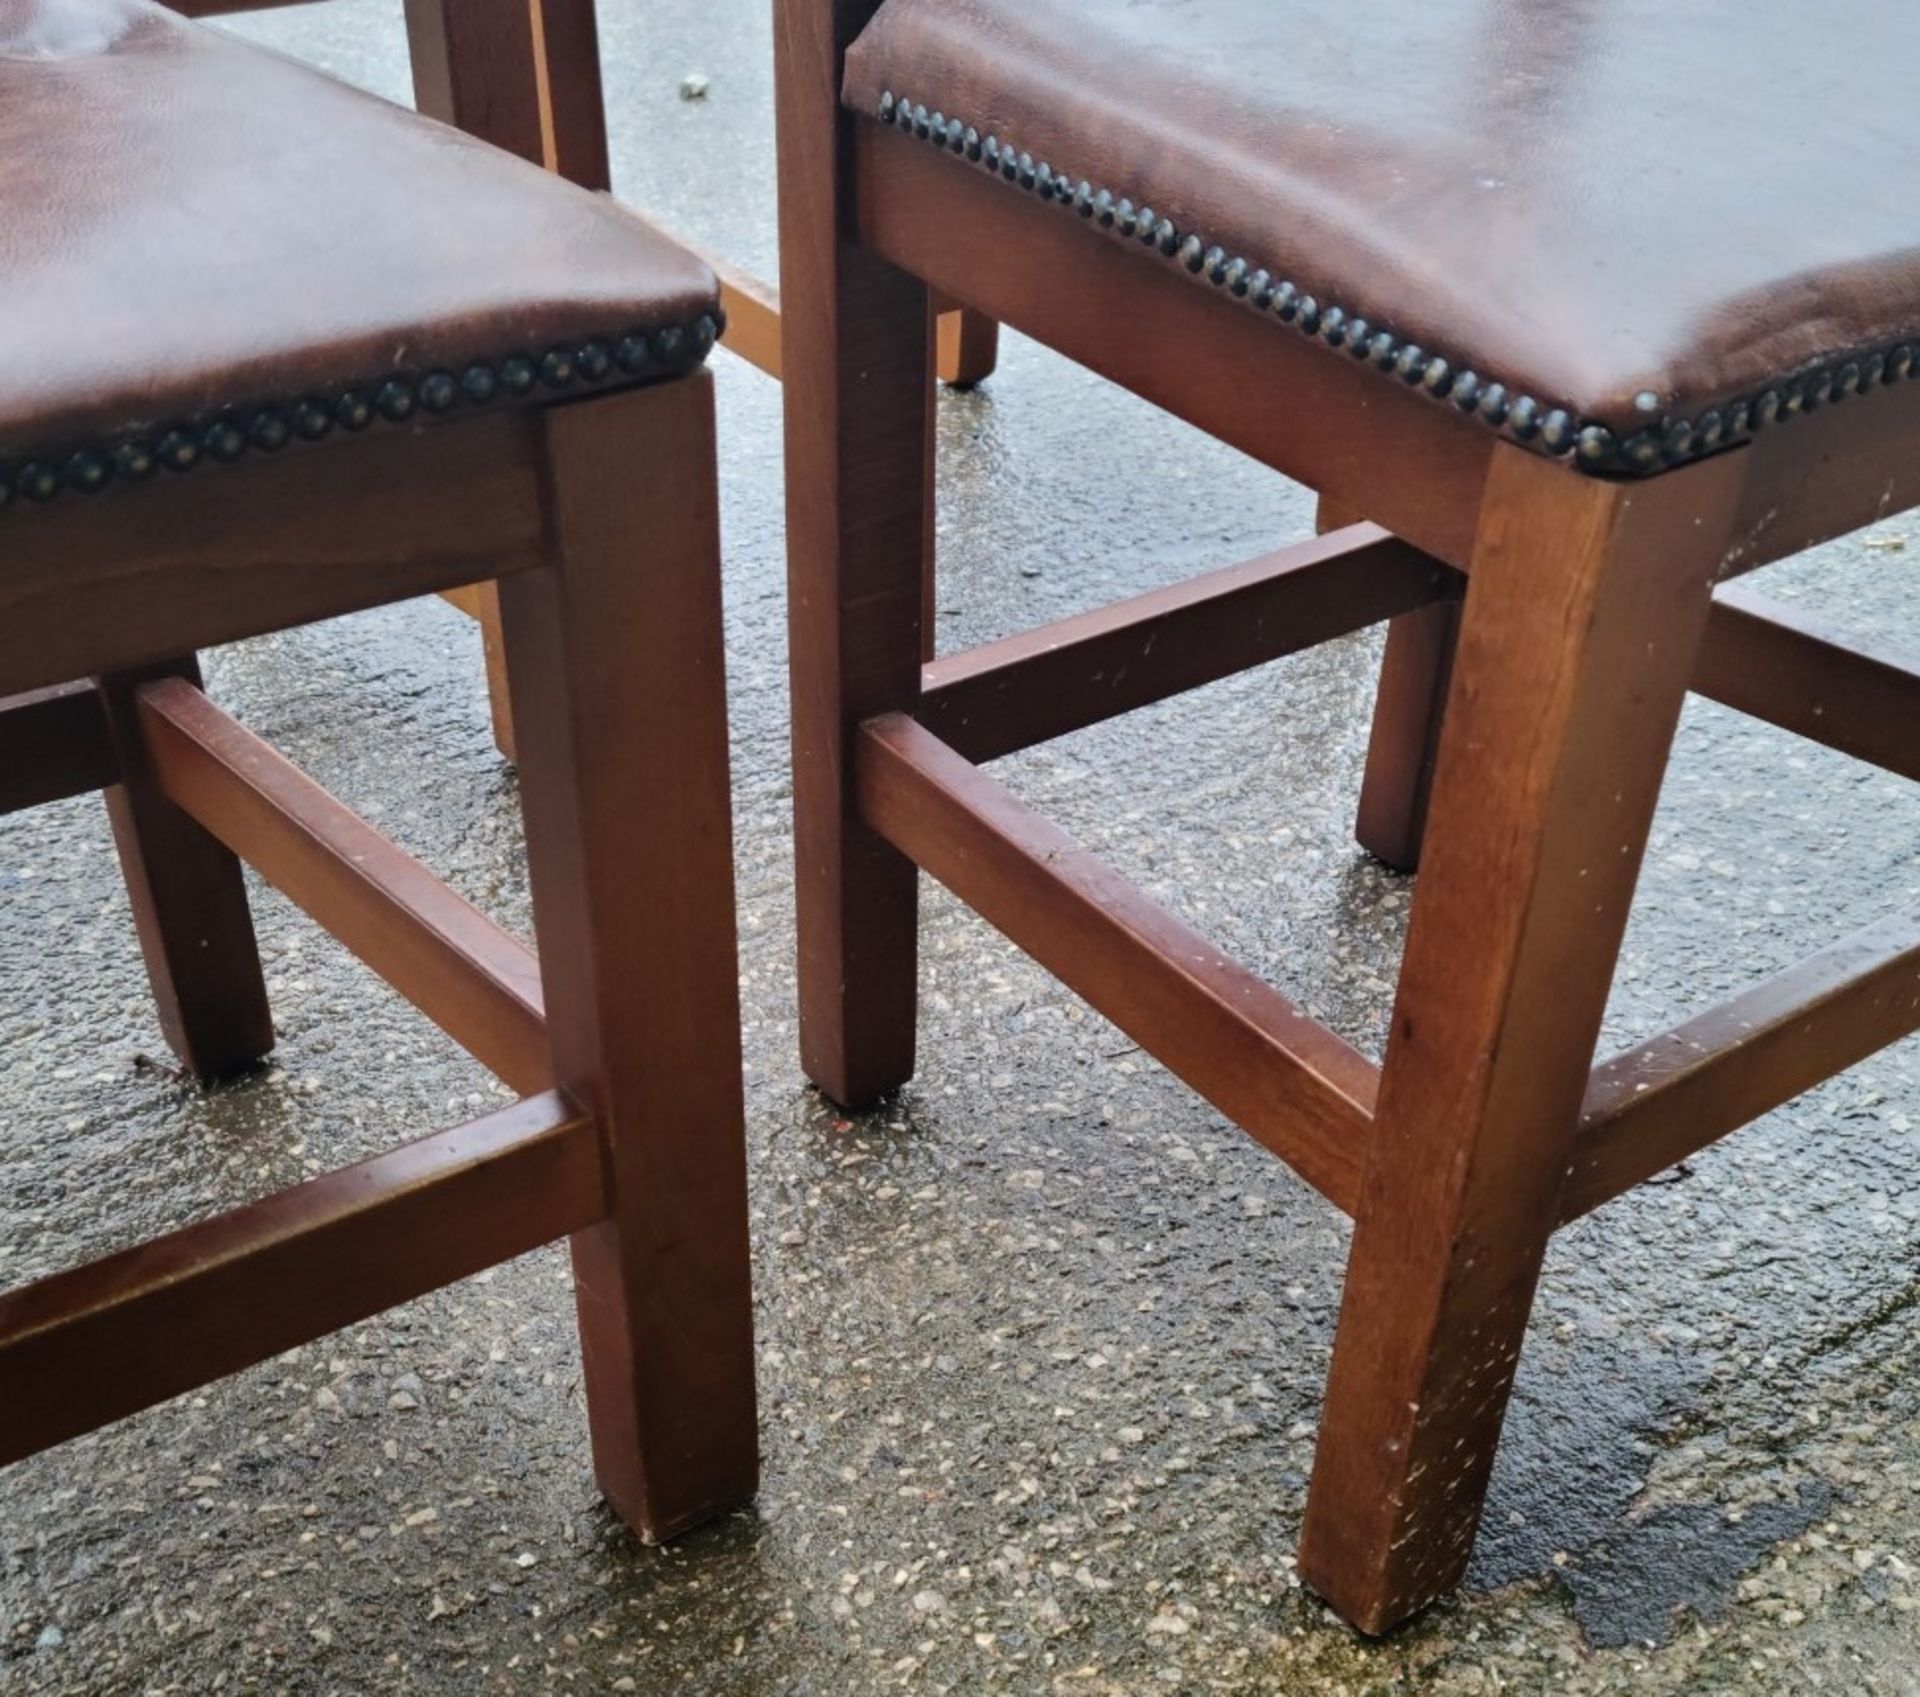 Set Of 4 x Aztec Print Dining Chairs With Faux Brown Leather Seating & Studded Seams - Image 3 of 5